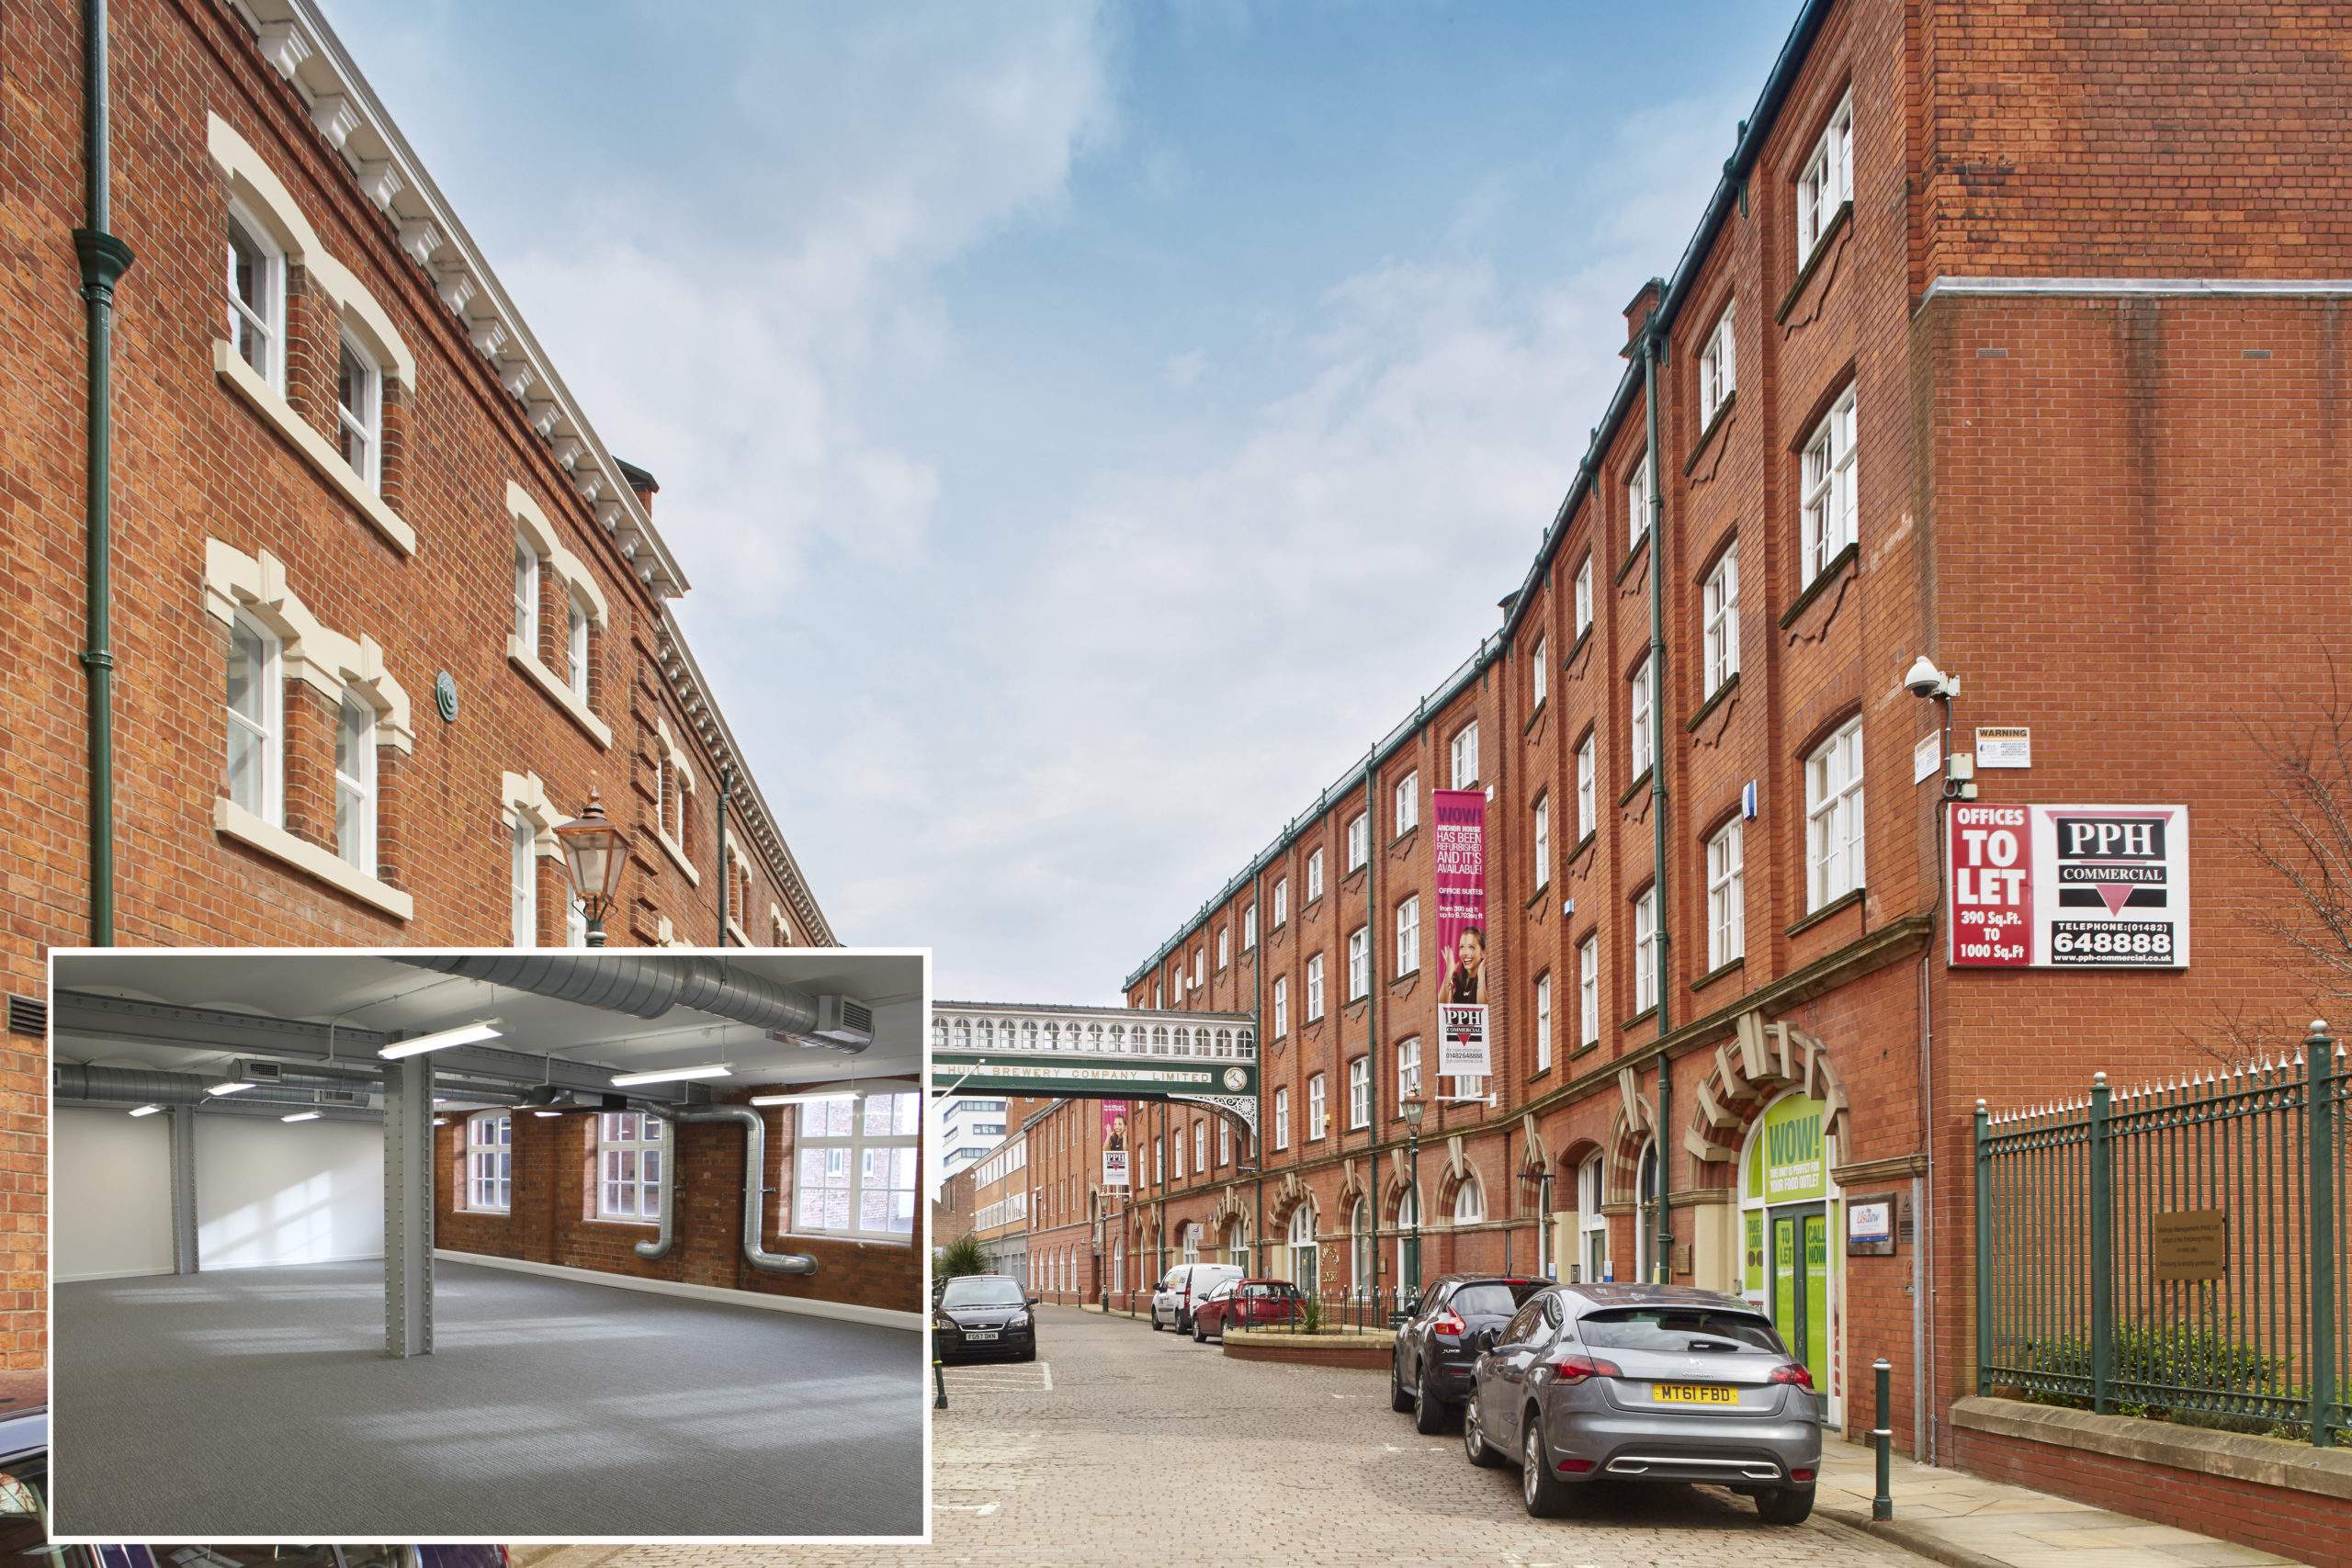 VERTUAL’S SUCCESS BECOMES A REALITY AS PPH HELP SECURE NEW ANCHOR HOUSE HEADQUARTERS IN HULL